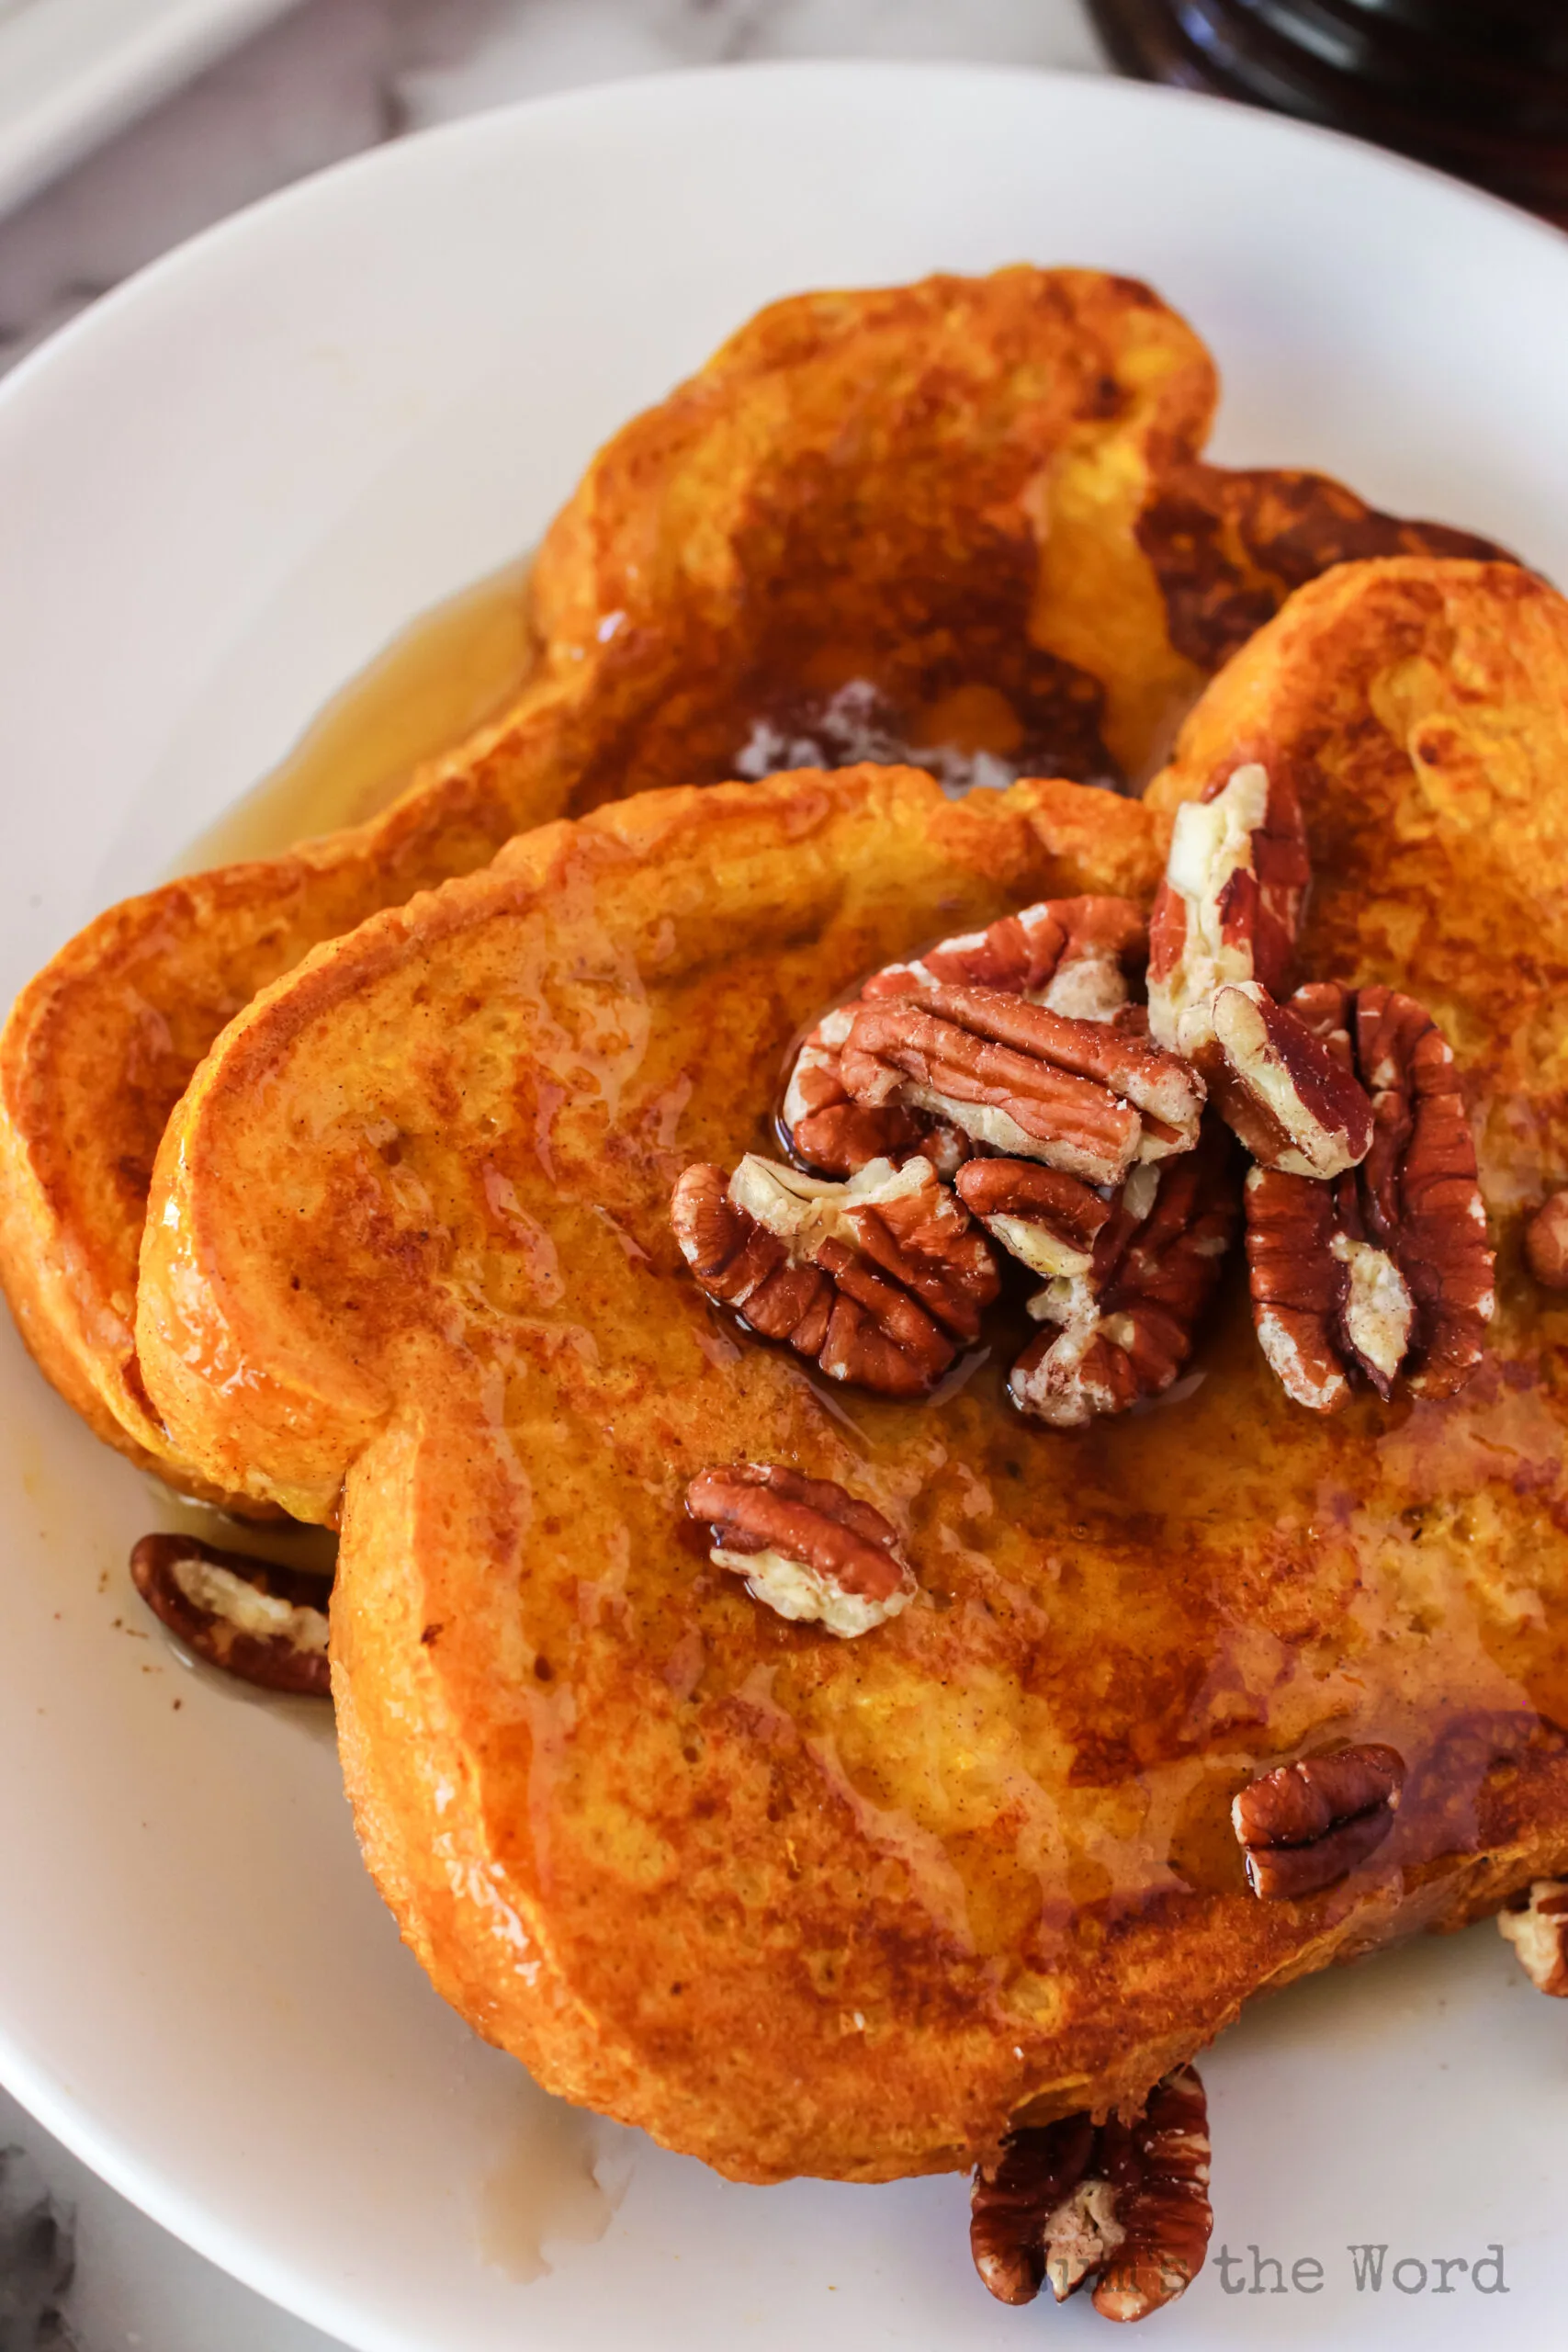 two slices of french toast on plate with syrup and pecans